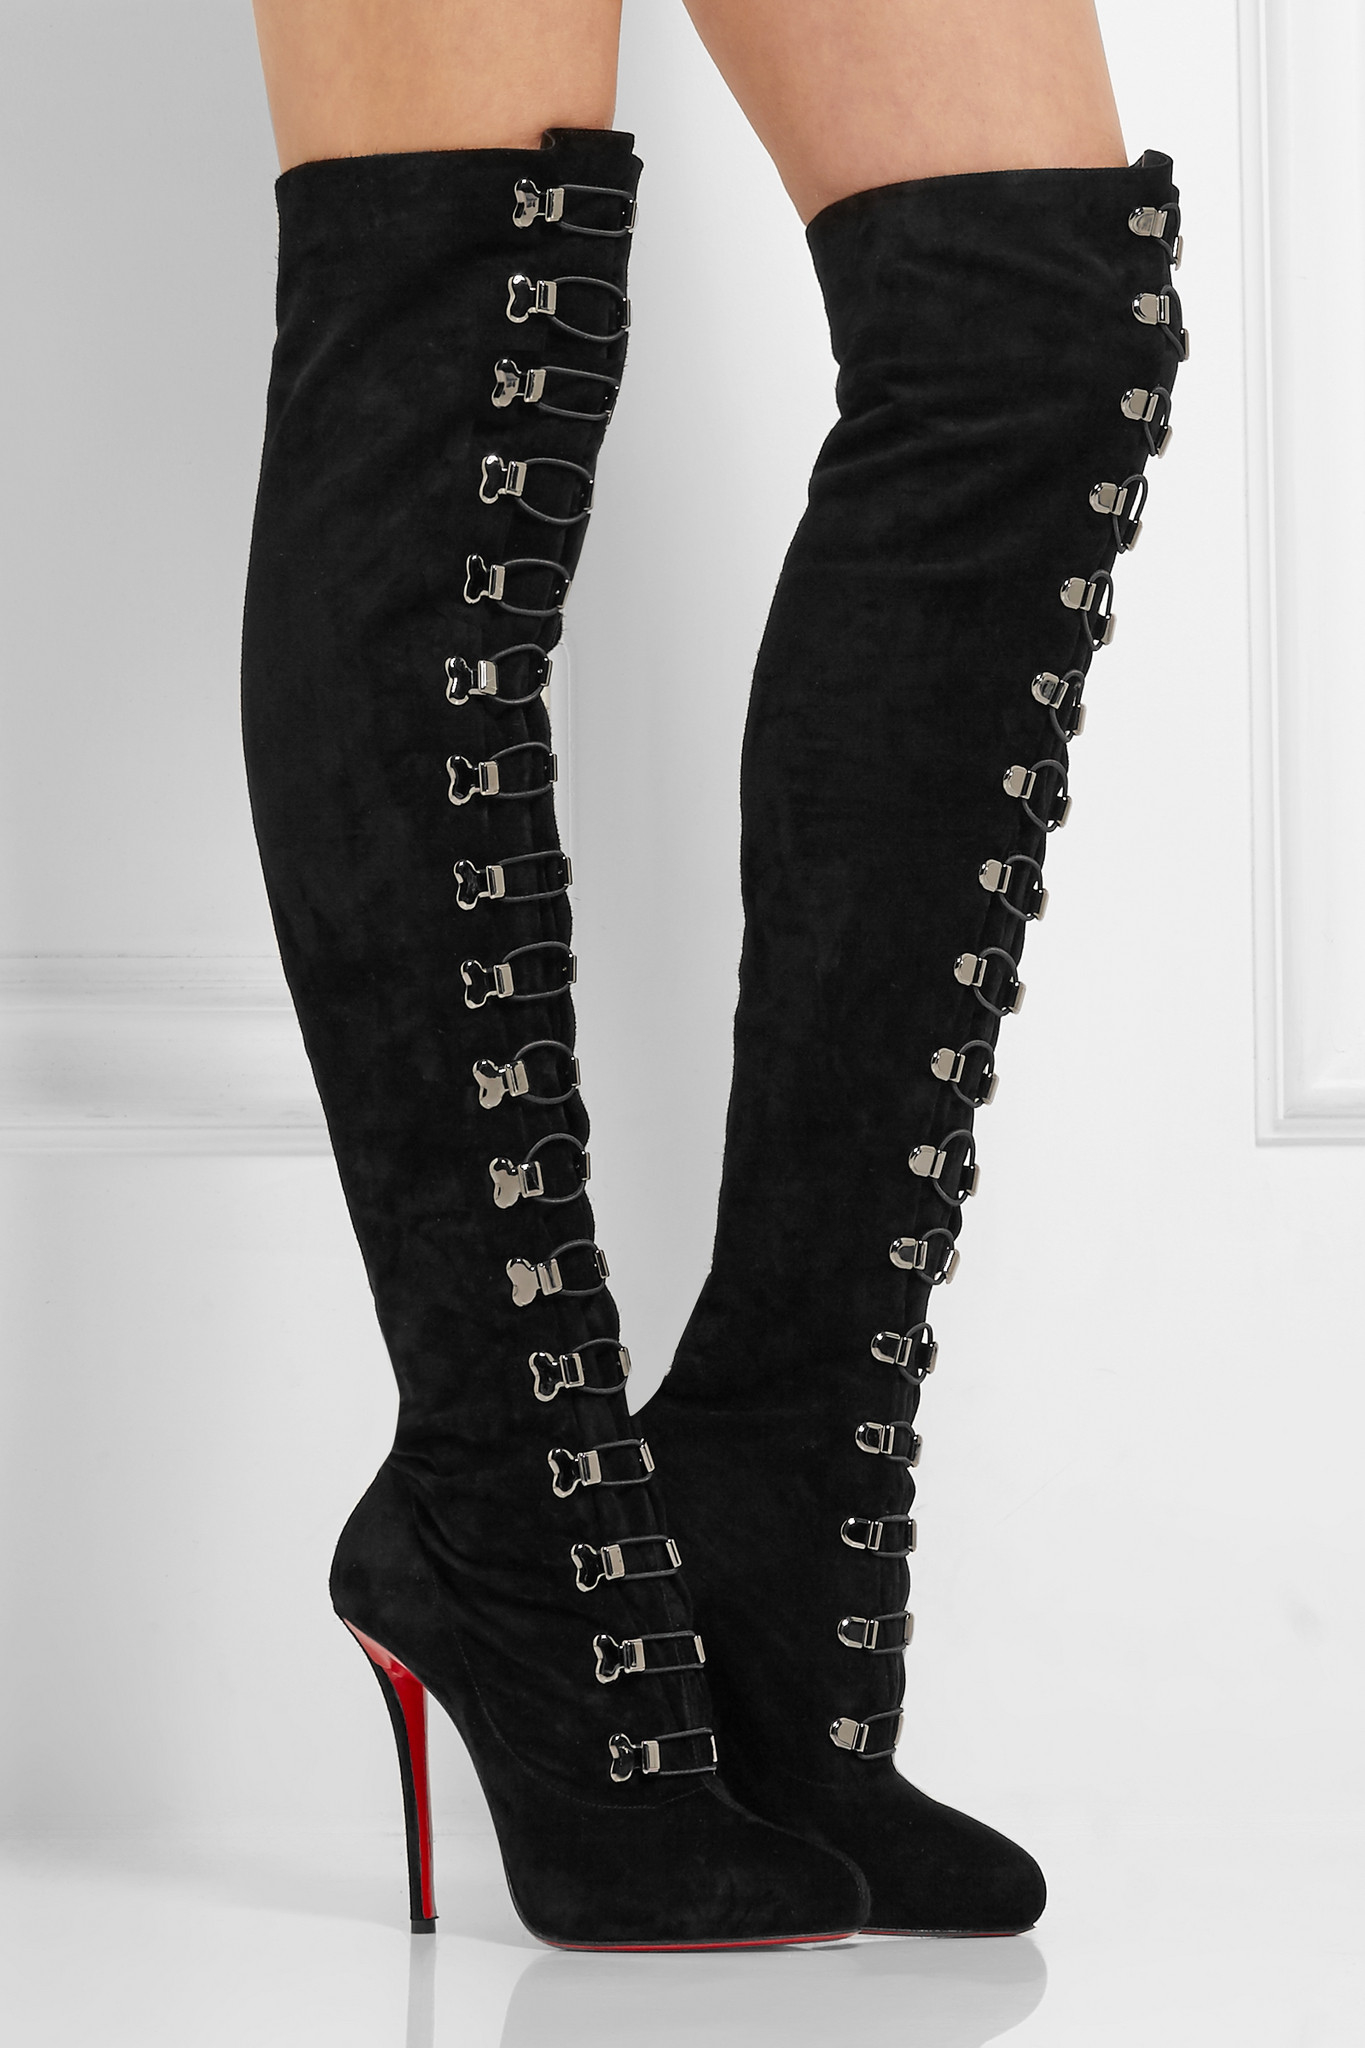 christian louboutin sempre monica 100 leather over-the-knee boots ...